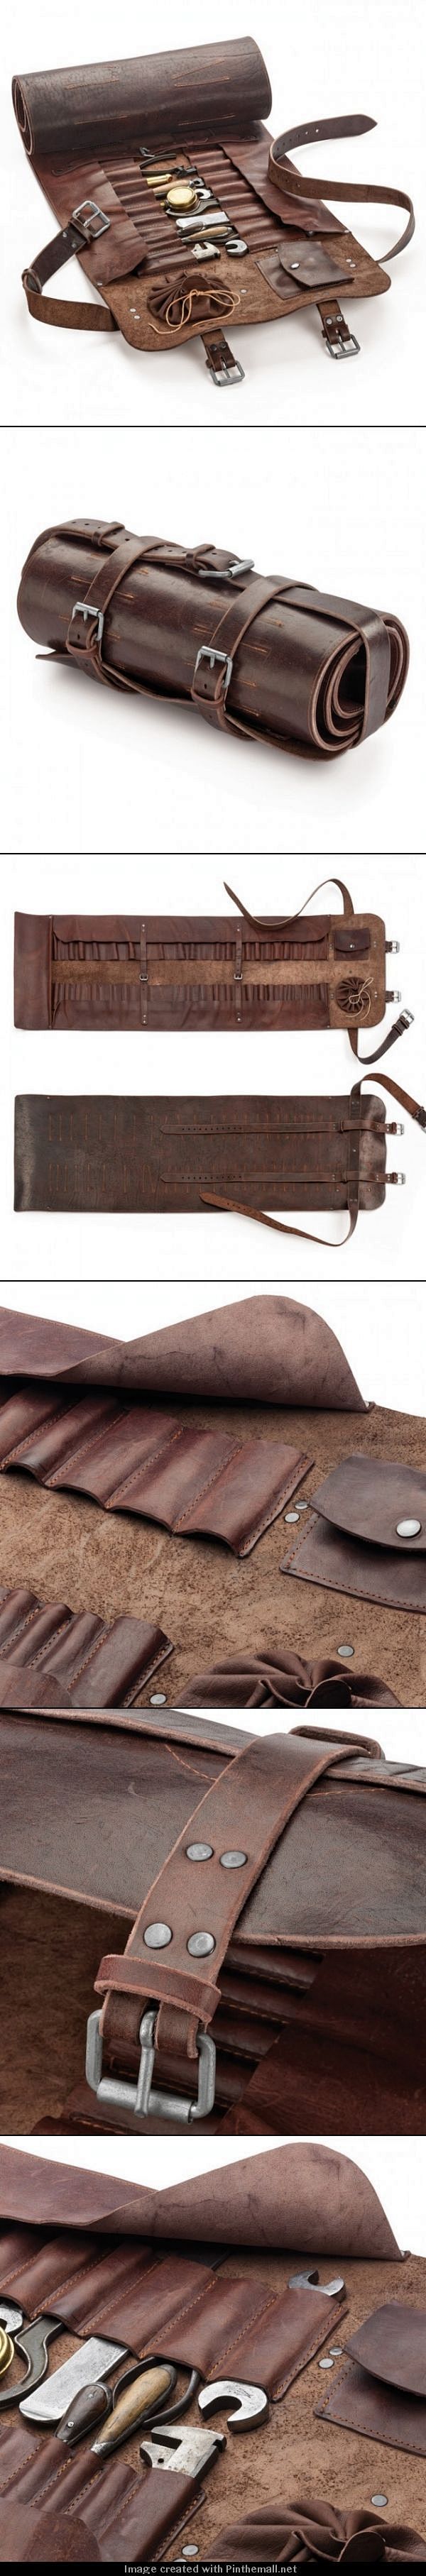 Leather Tool Bag@北坤人...